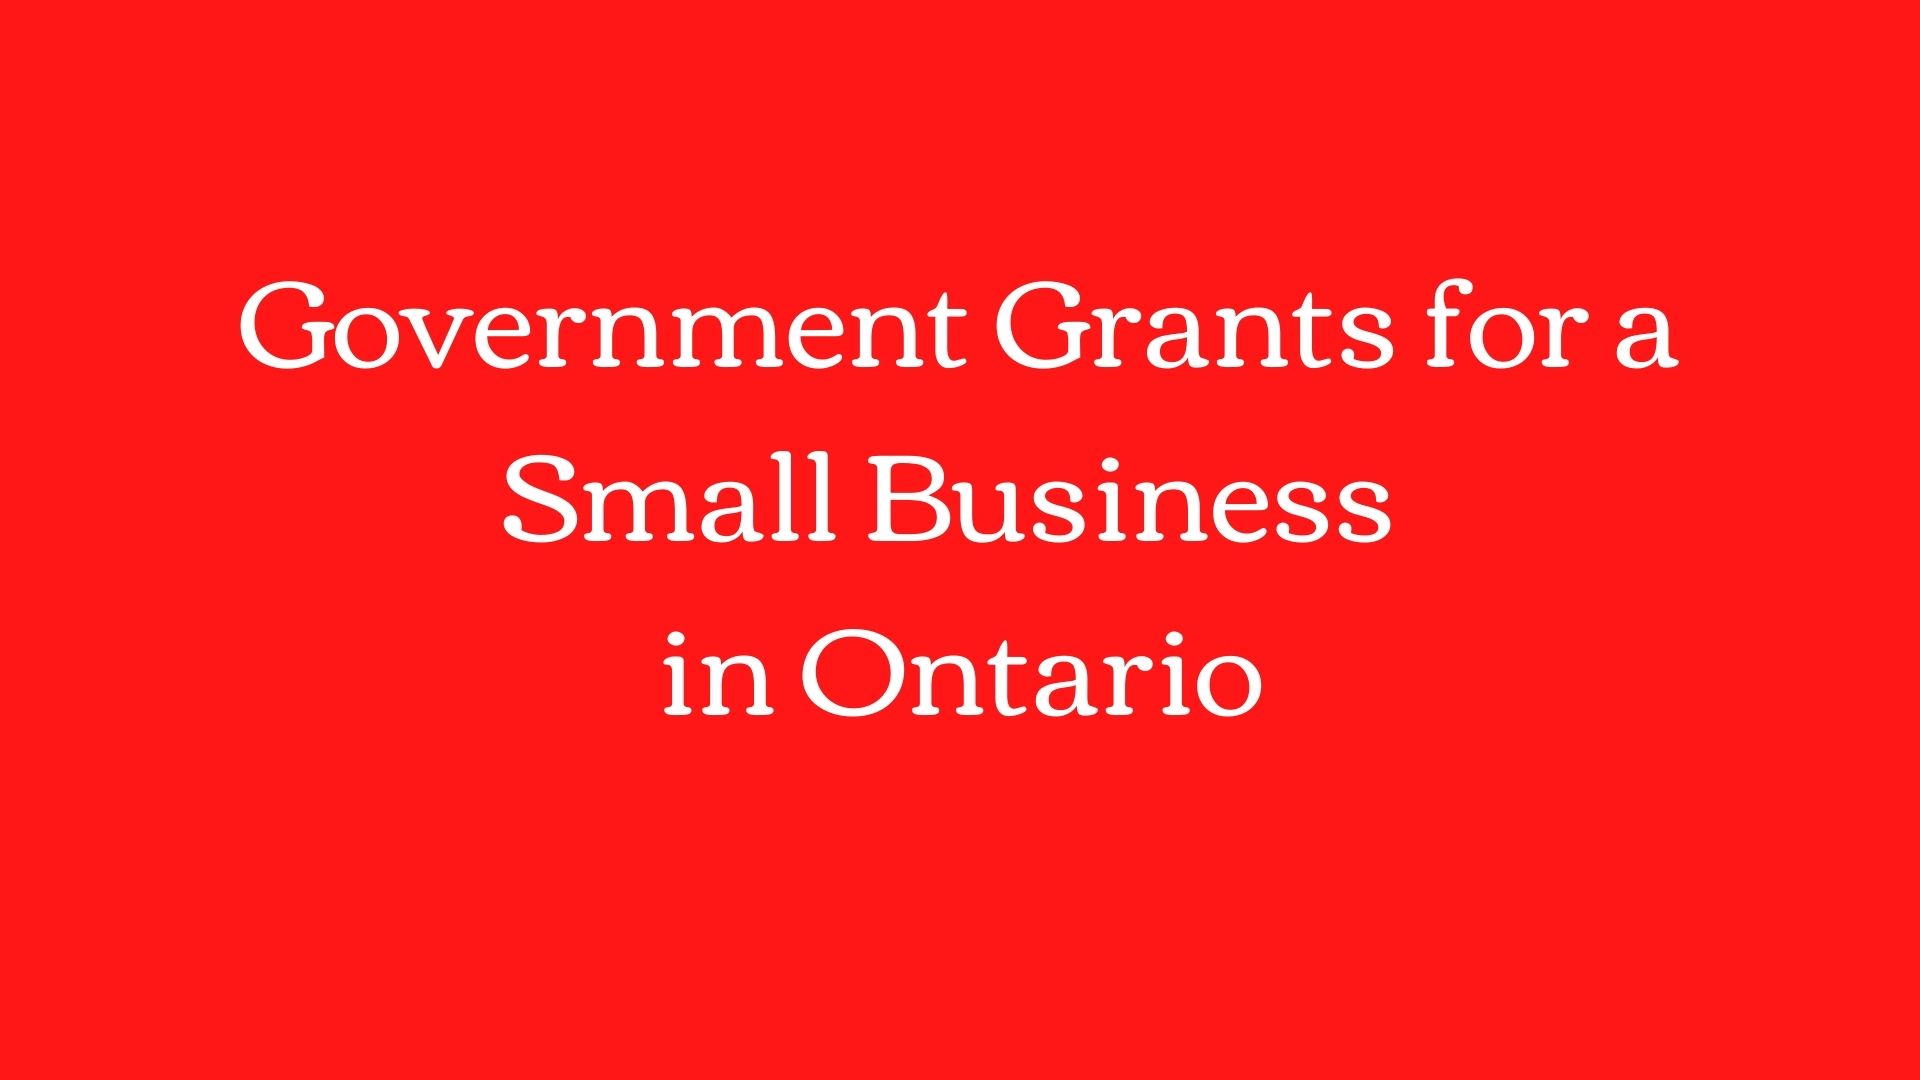 Government Grants for a Small Business in Ontario